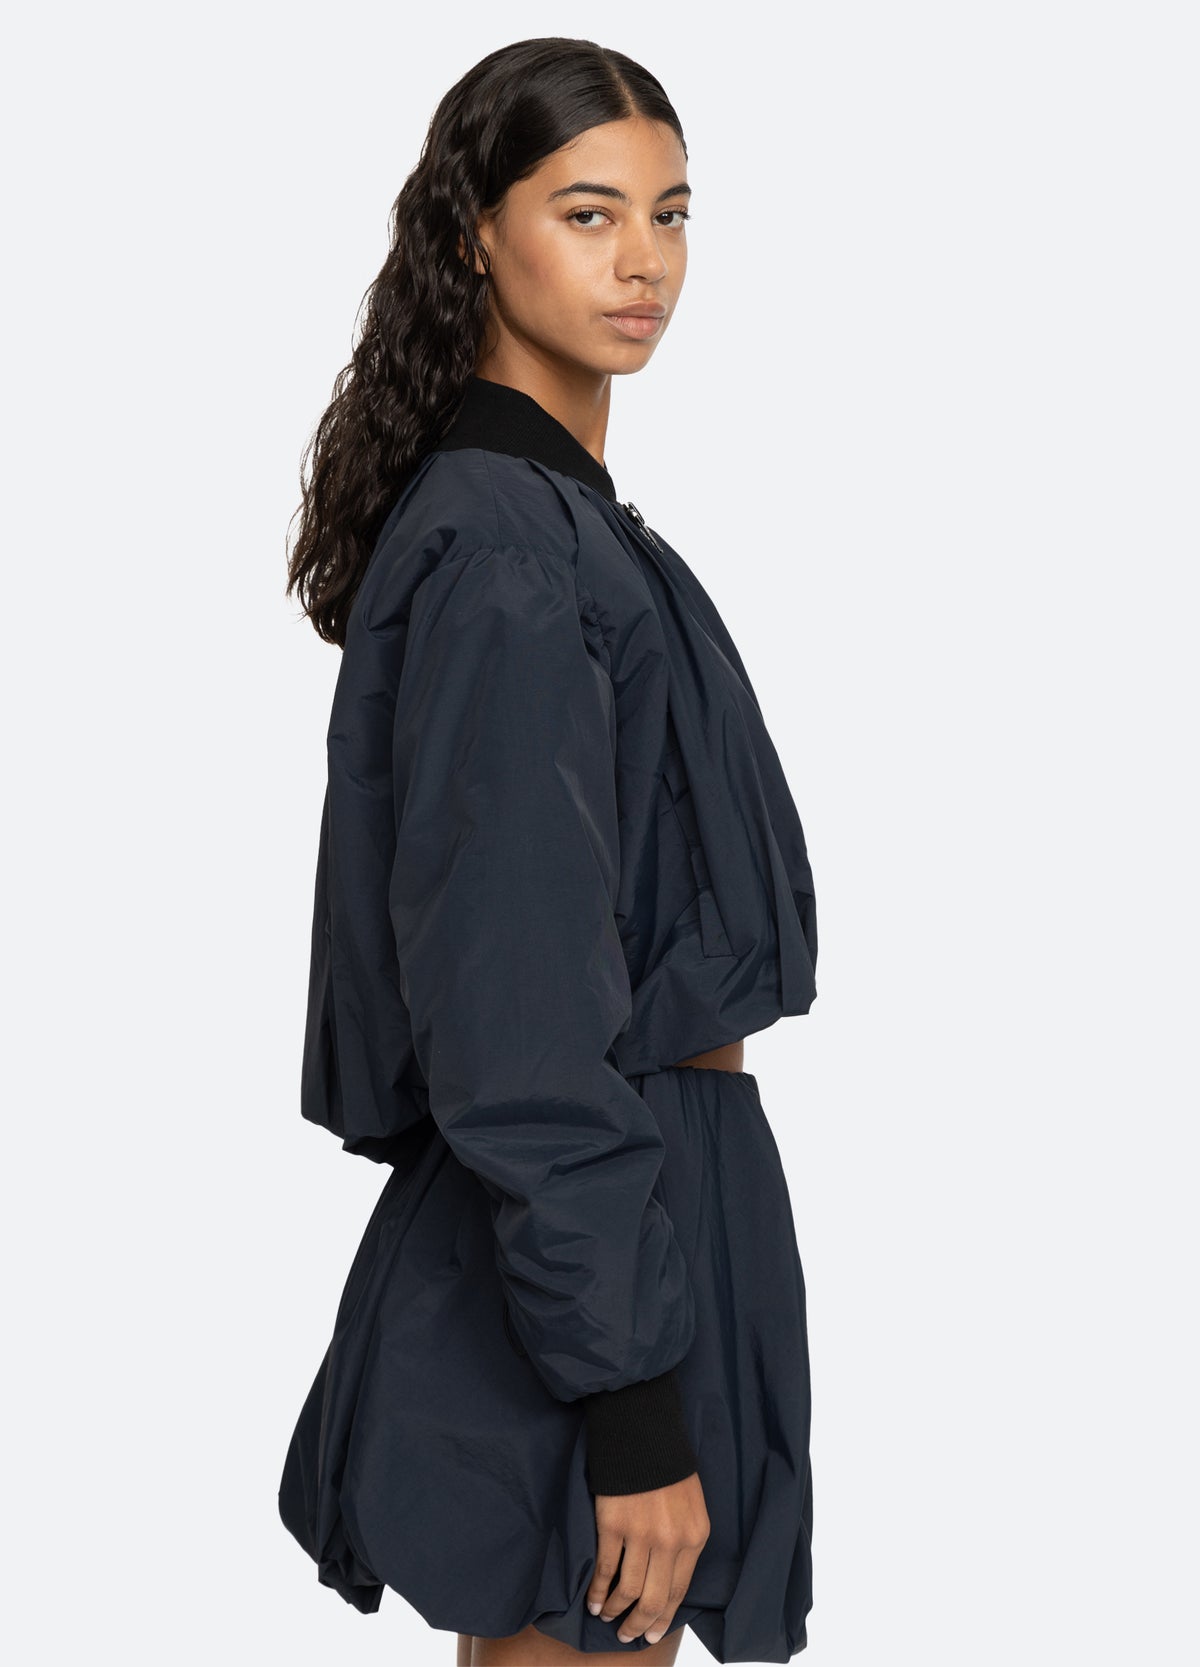 navy-evelyn jacket-side view - 5